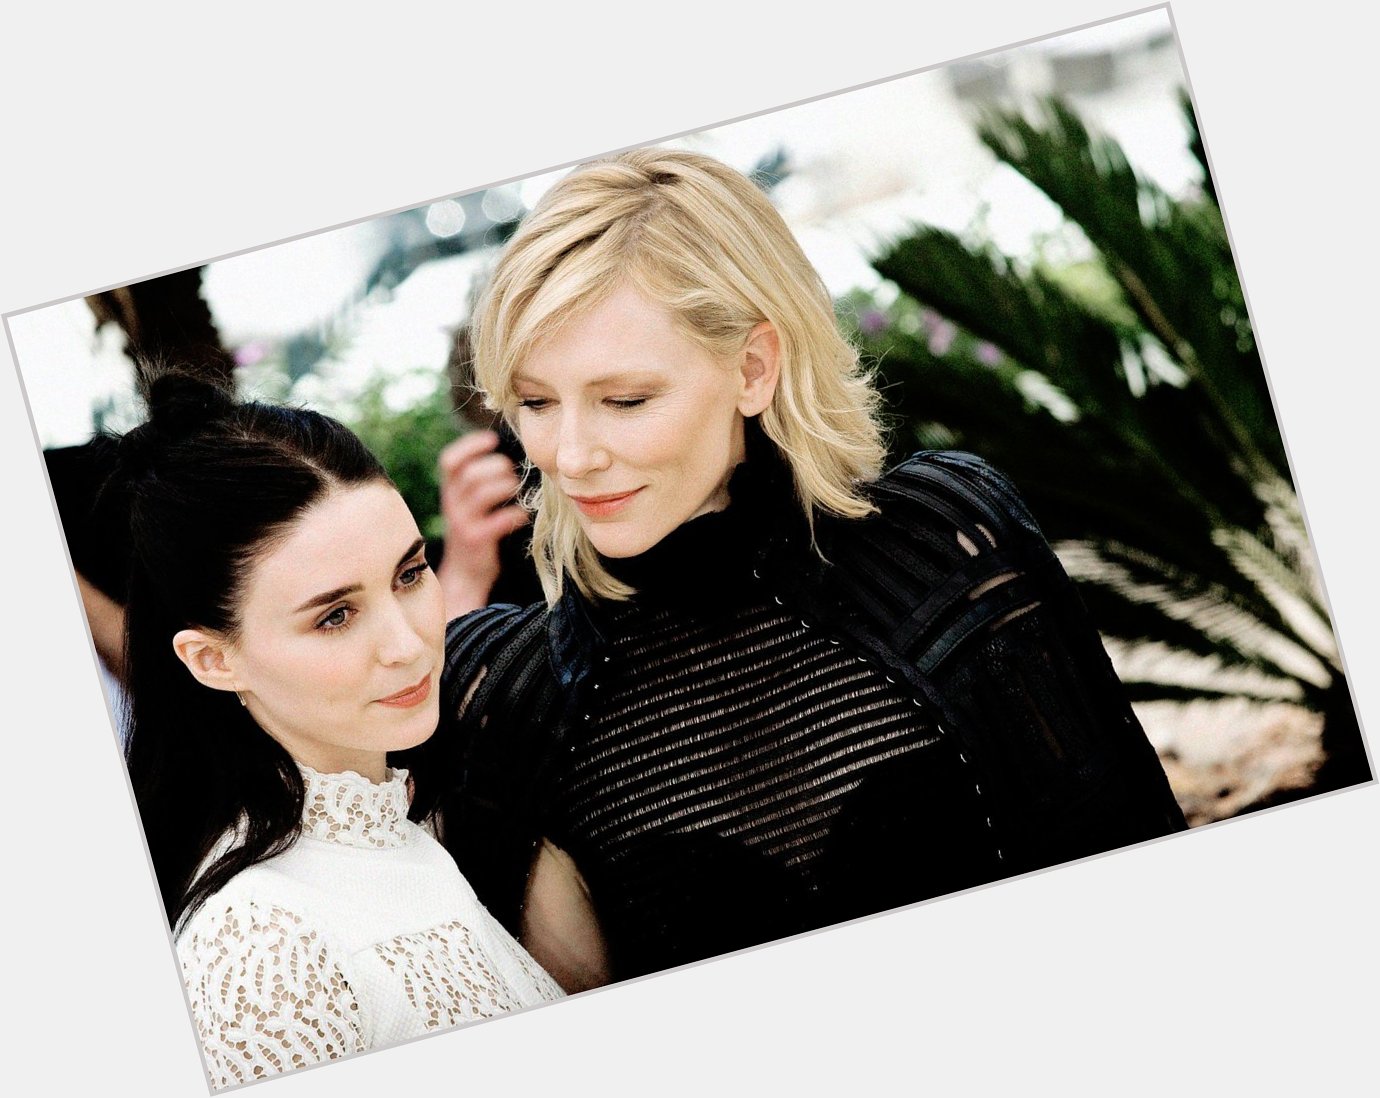 Happy Birthday, Rooney Mara! Our angel flung out of space 